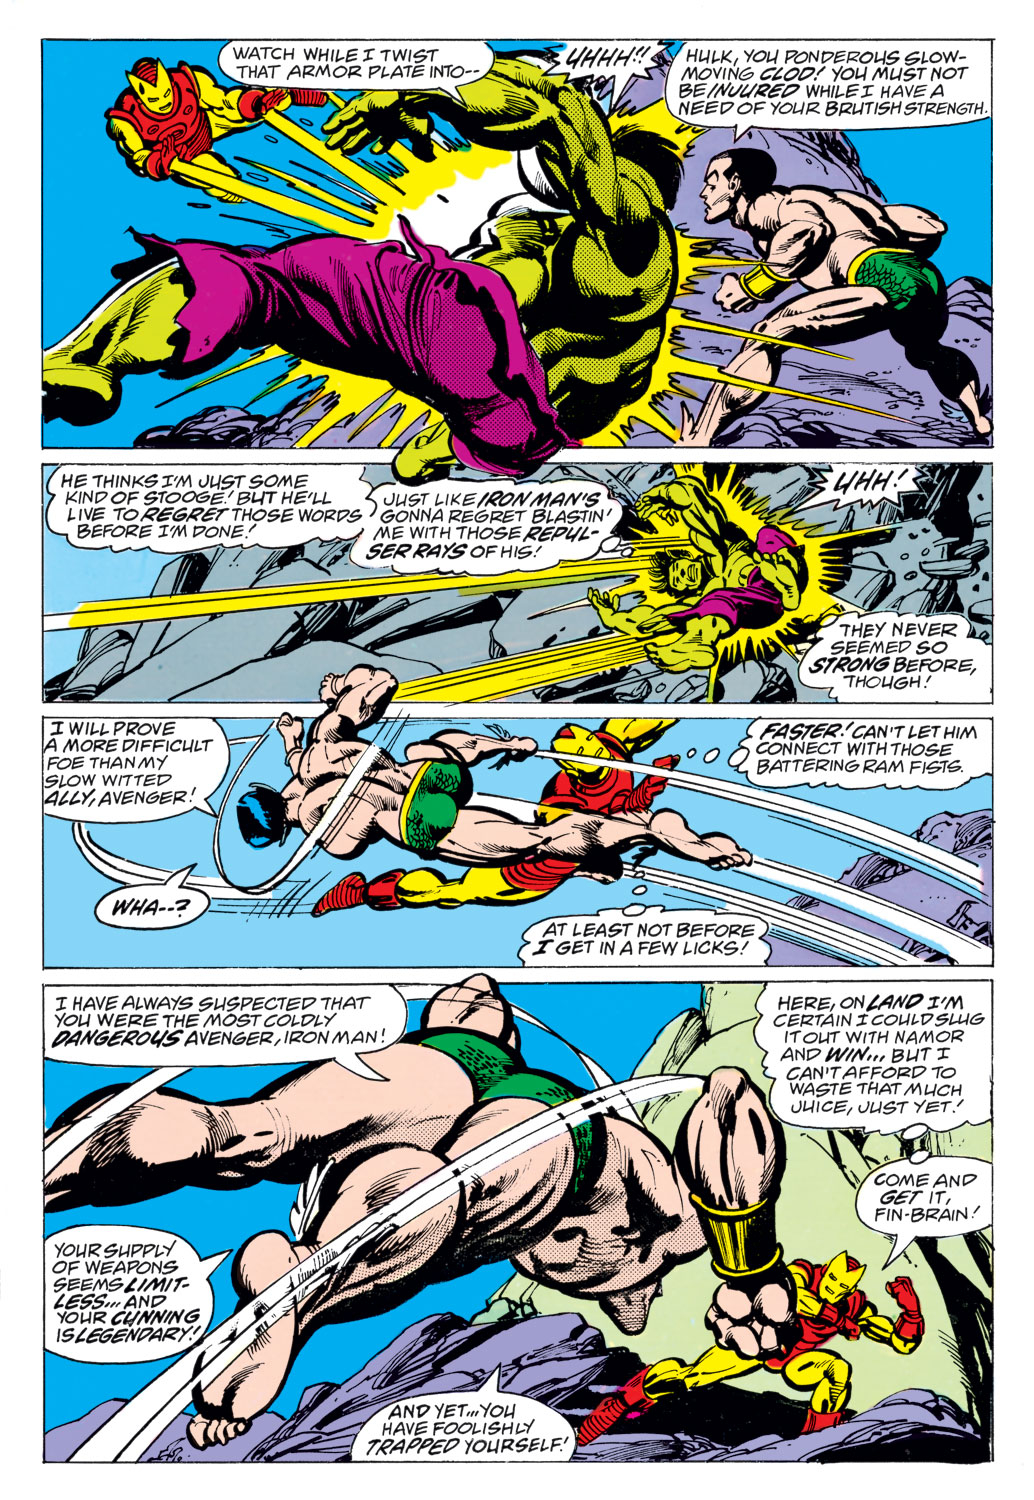 What If? (1977) issue 3 - The Avengers had never been - Page 17